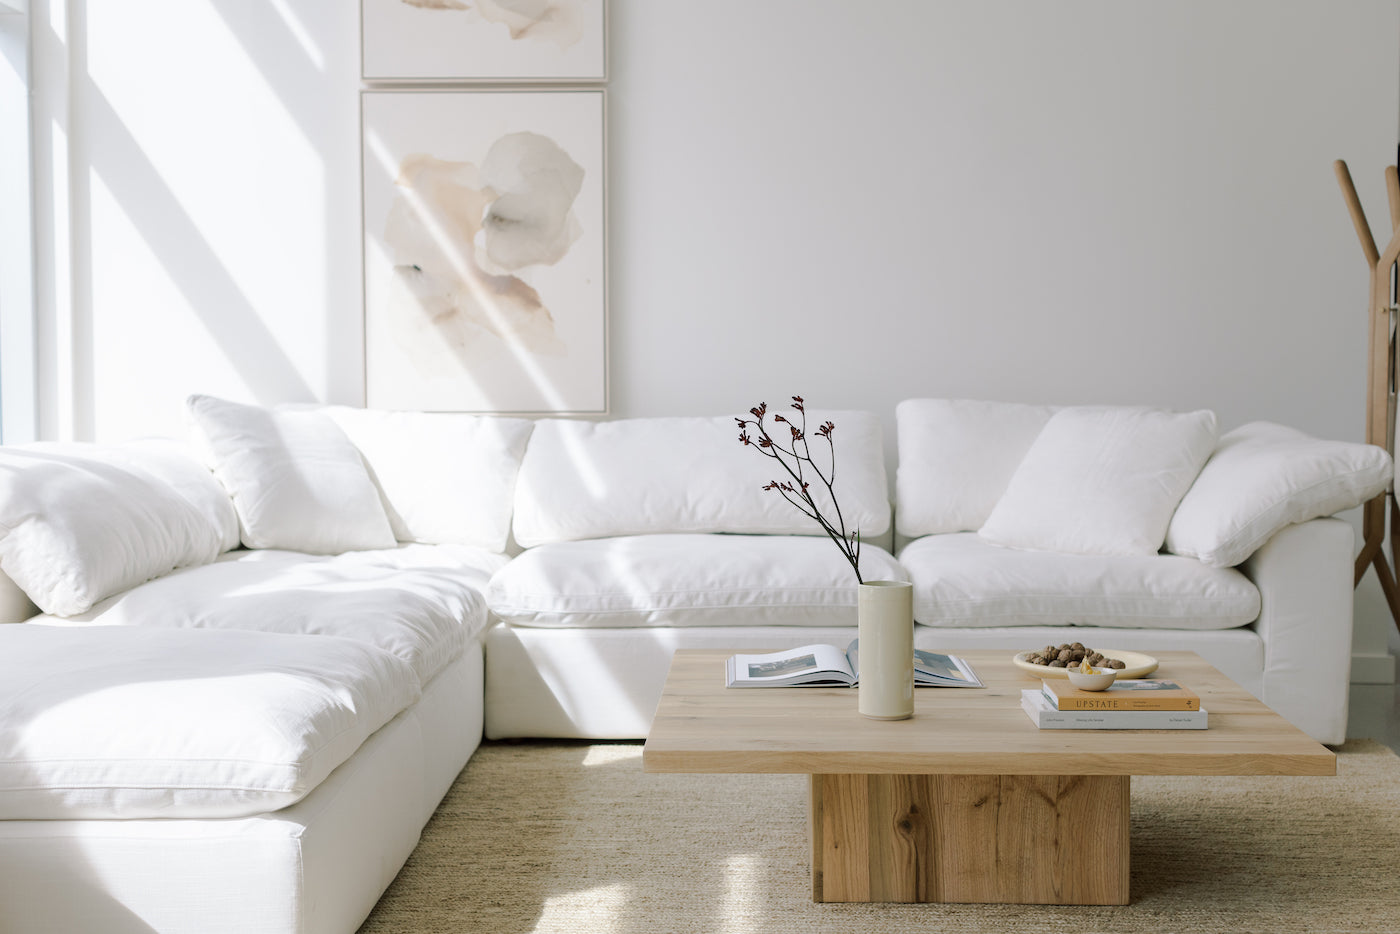 Minimalist living room with a large white sectional sofa, wooden coffee table, and neutral decor. A small vase with branches sits on the table alongside books. Two abstract art pieces are on the wall, and soft natural light filters through the space.